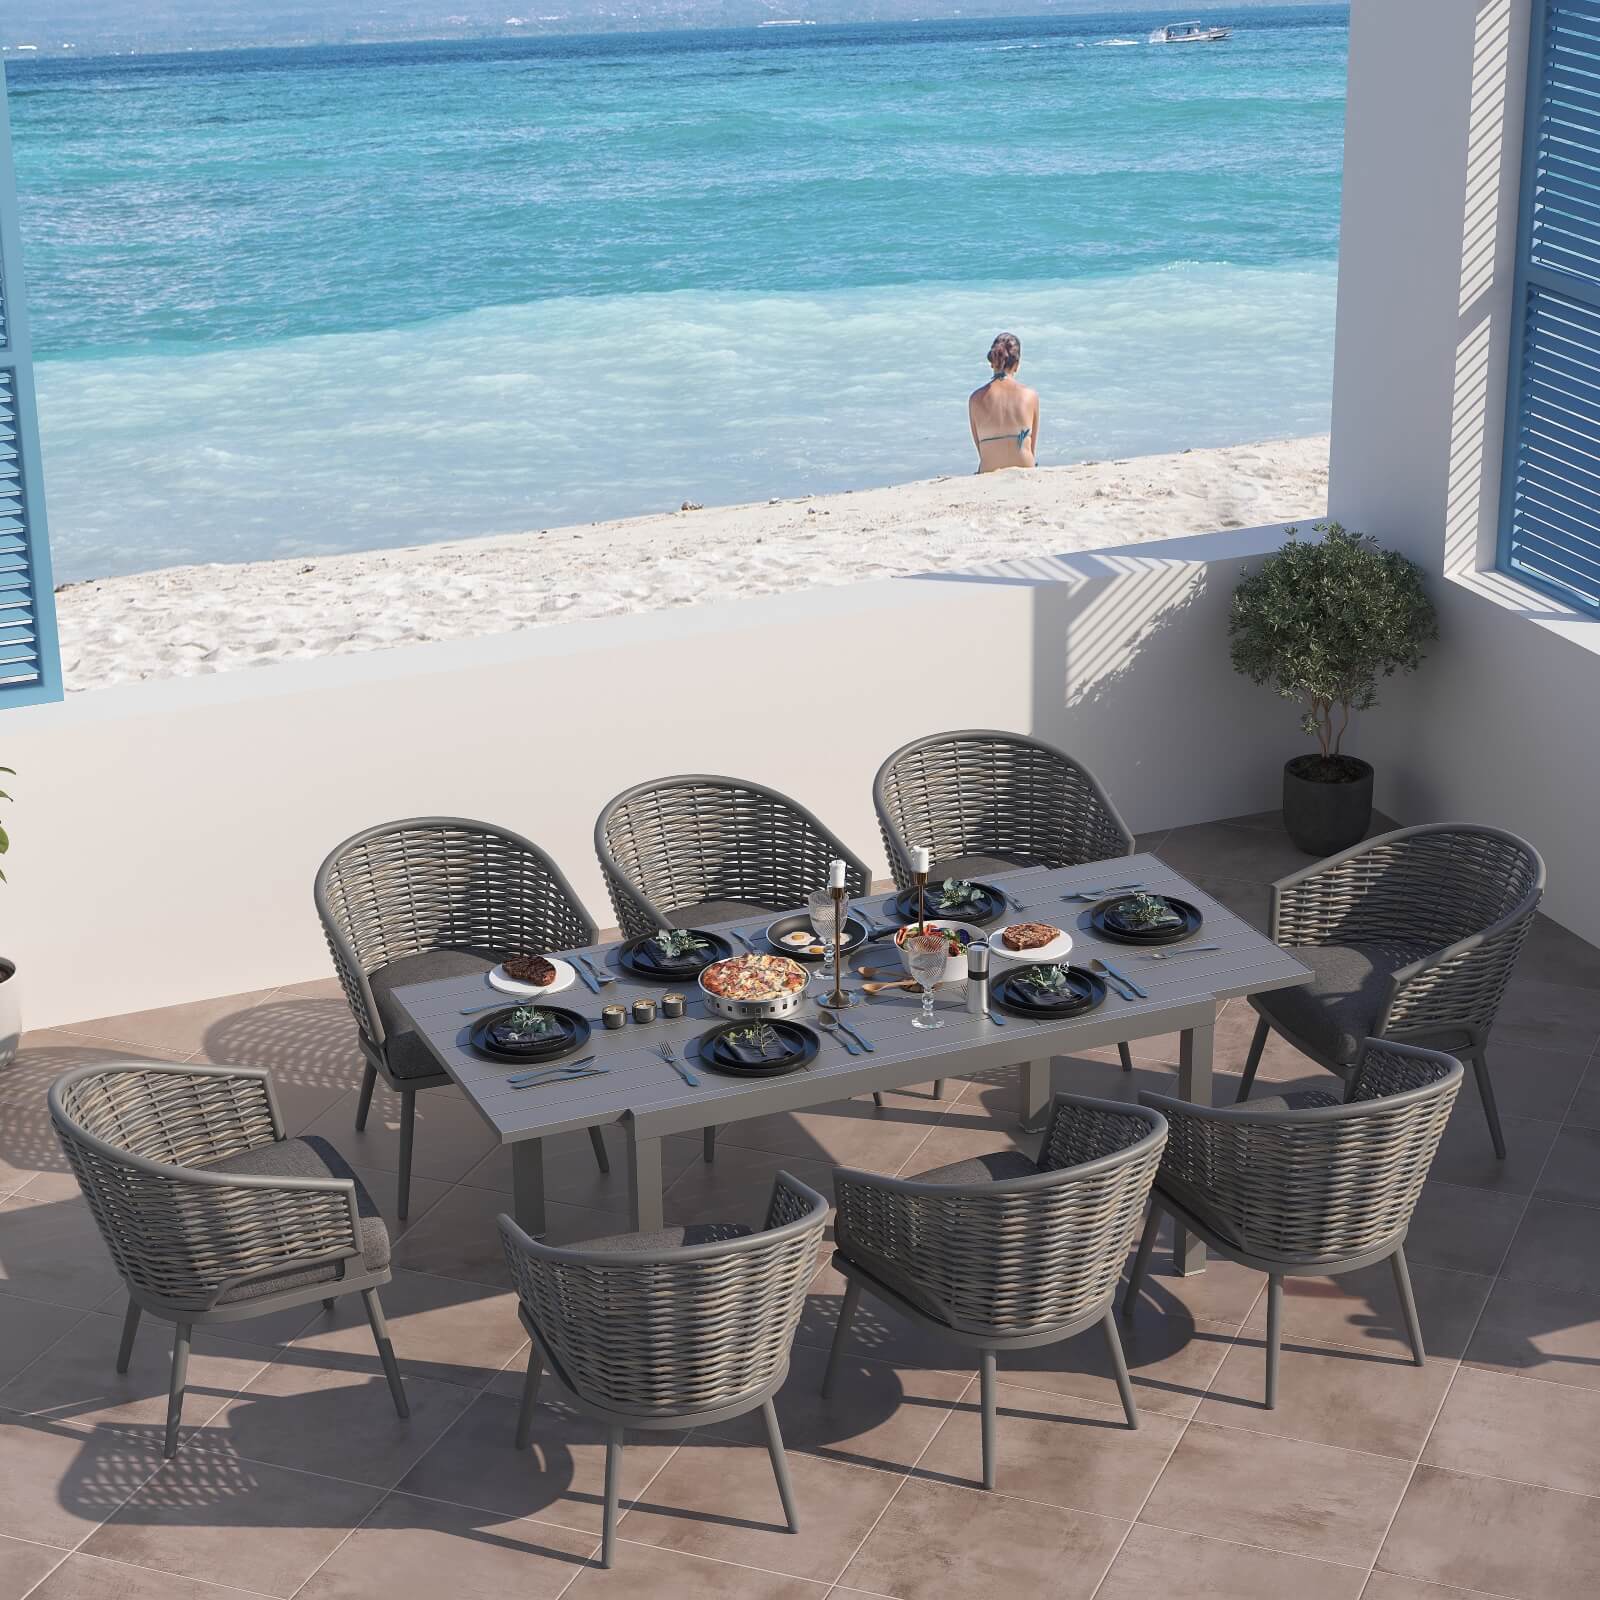 Burano Grey wicker outdoor Dining Set with aluminum frame, 8 chairs with grey cushions, 1 aluminum extendable rectangle dining Table,  in the garden- Jardina Furniture#Piece_9-pc.